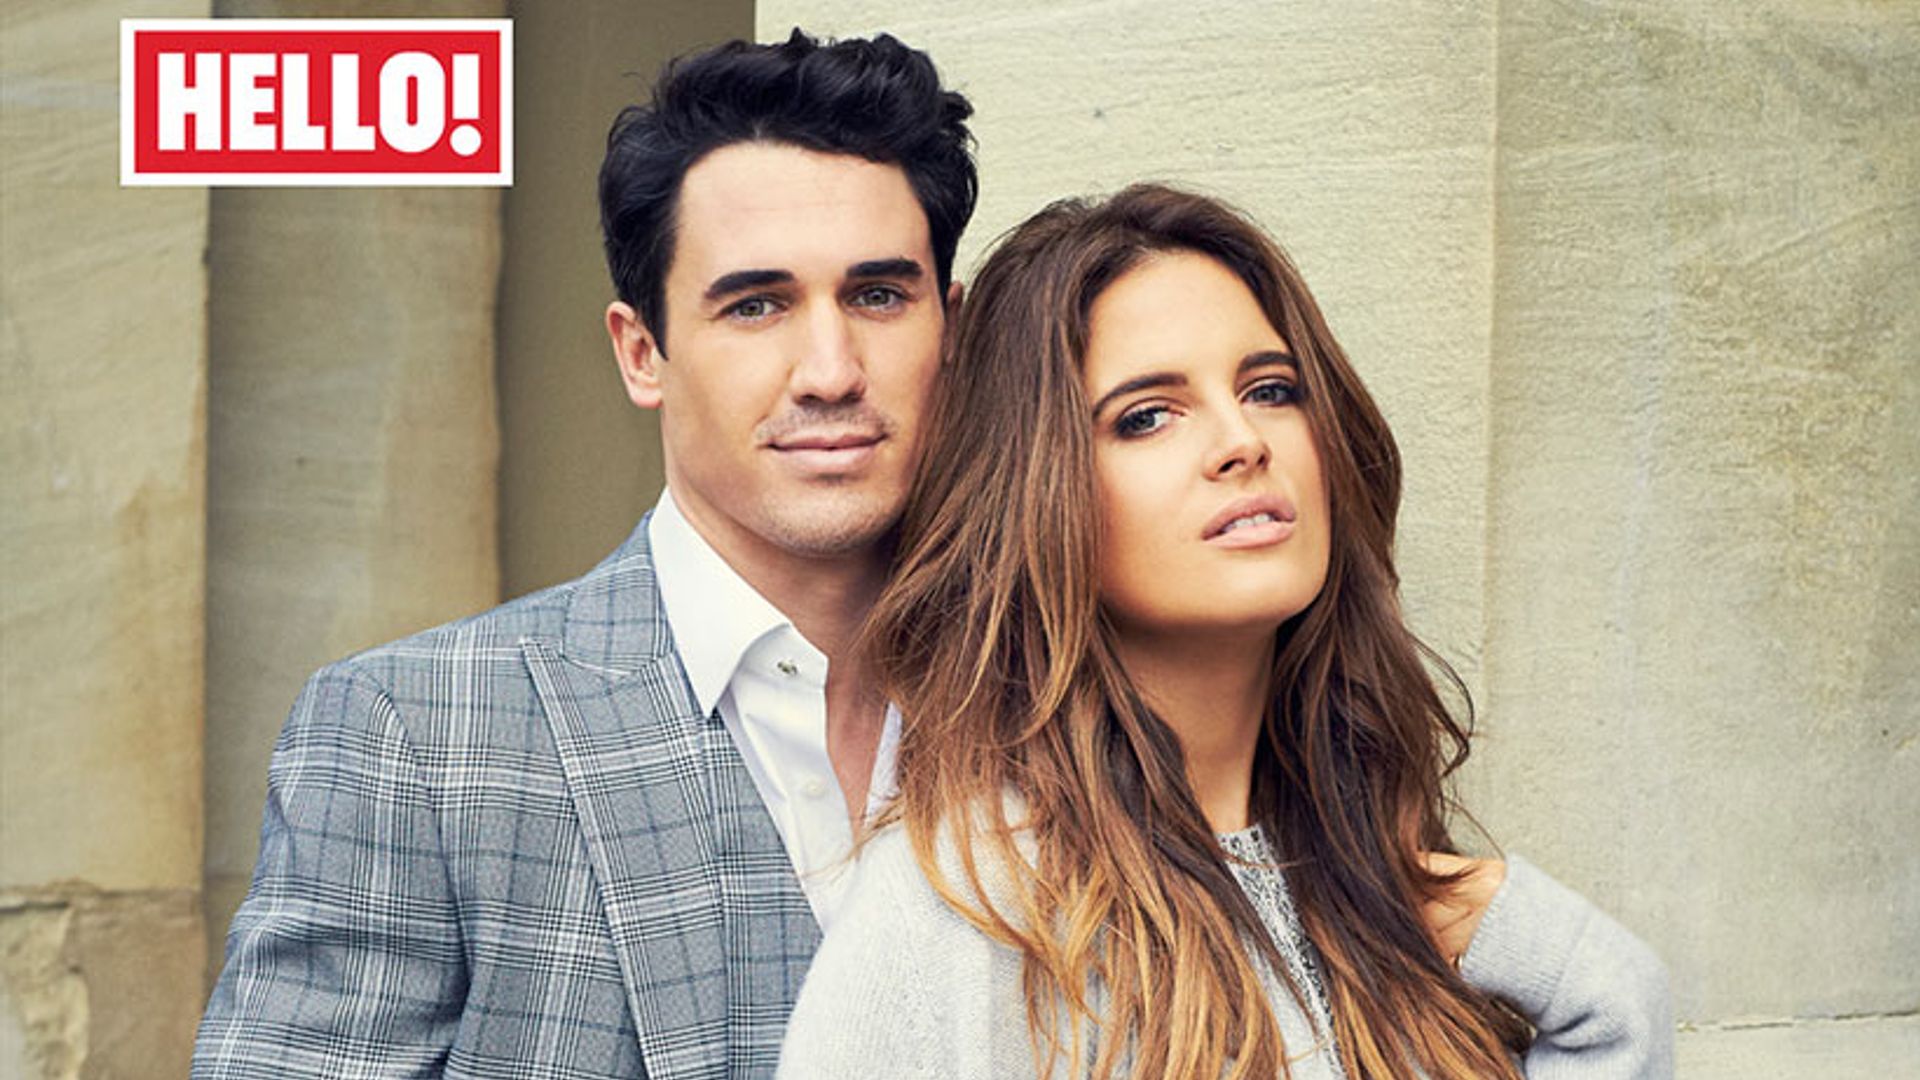 Exclusive! Binky Felstead expecting first child with Made in Chelsea costar Josh 'JP' Patterson